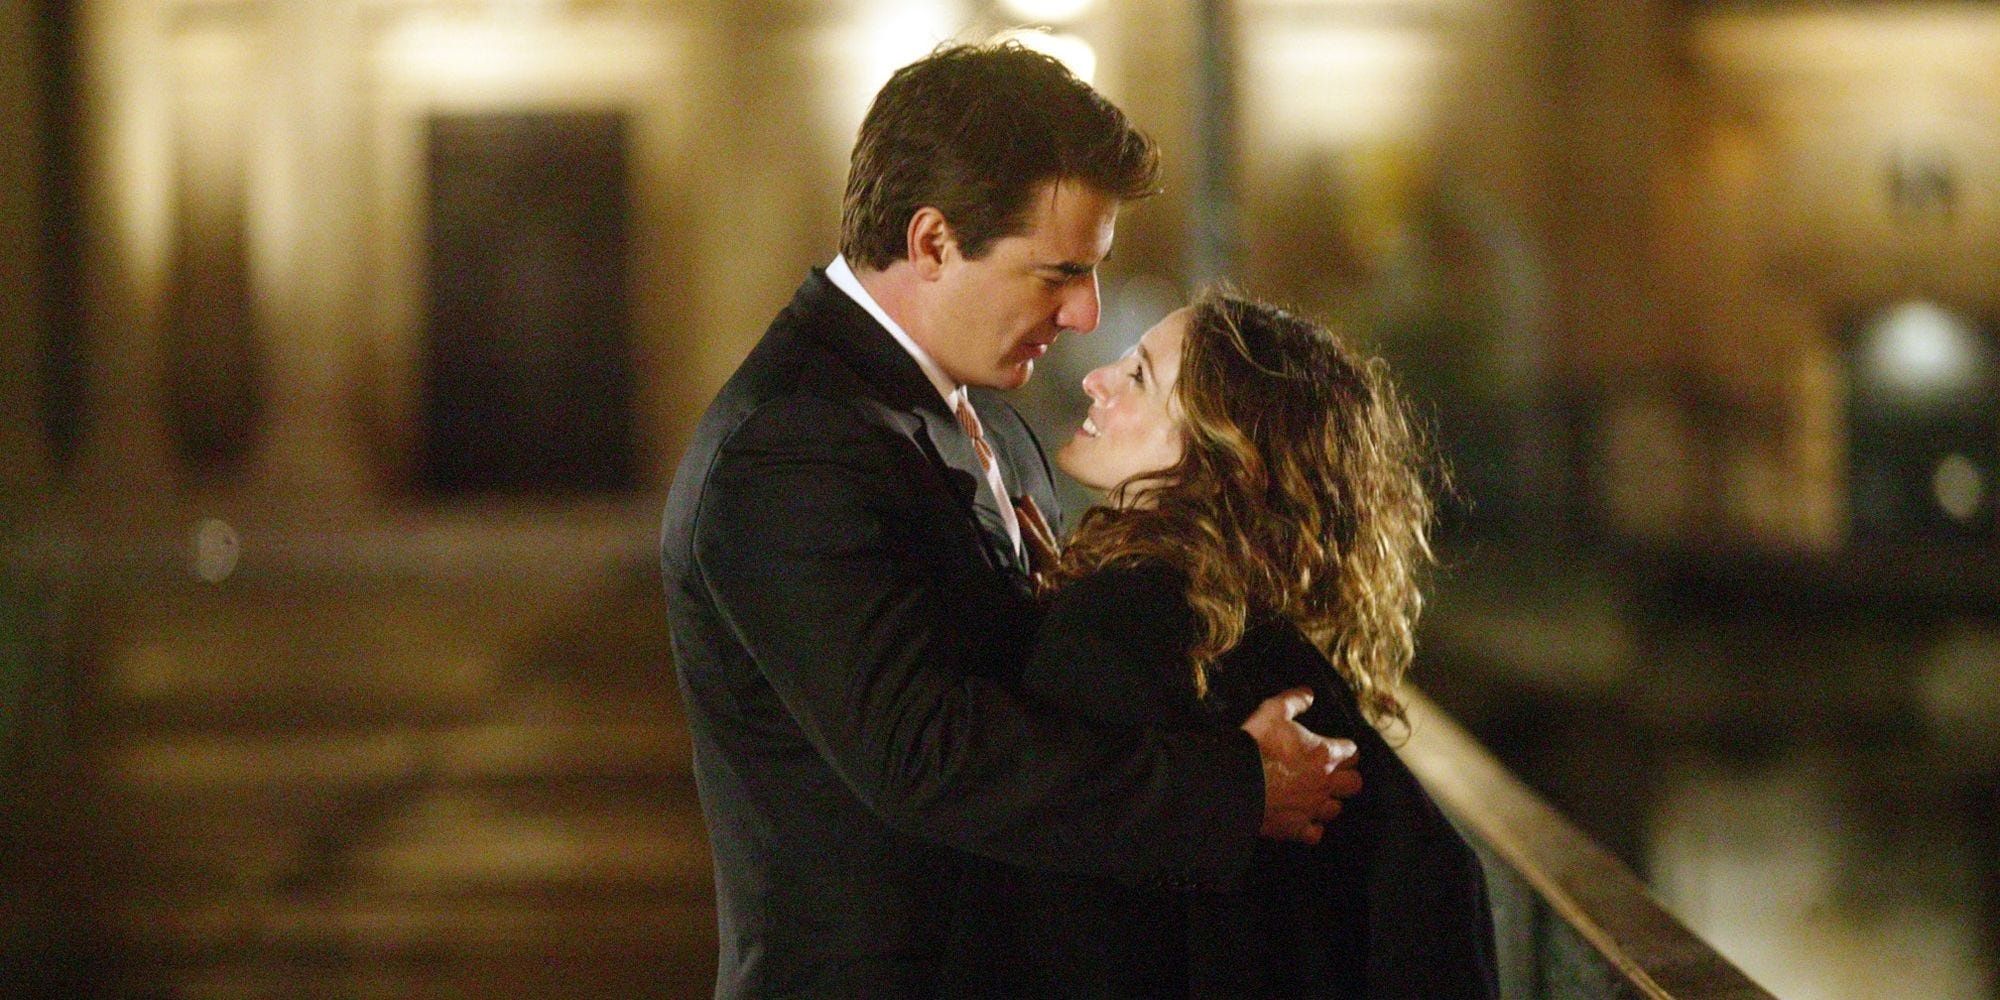 Sex and the City': Relationship Timeline for Carrie and Mr. Big